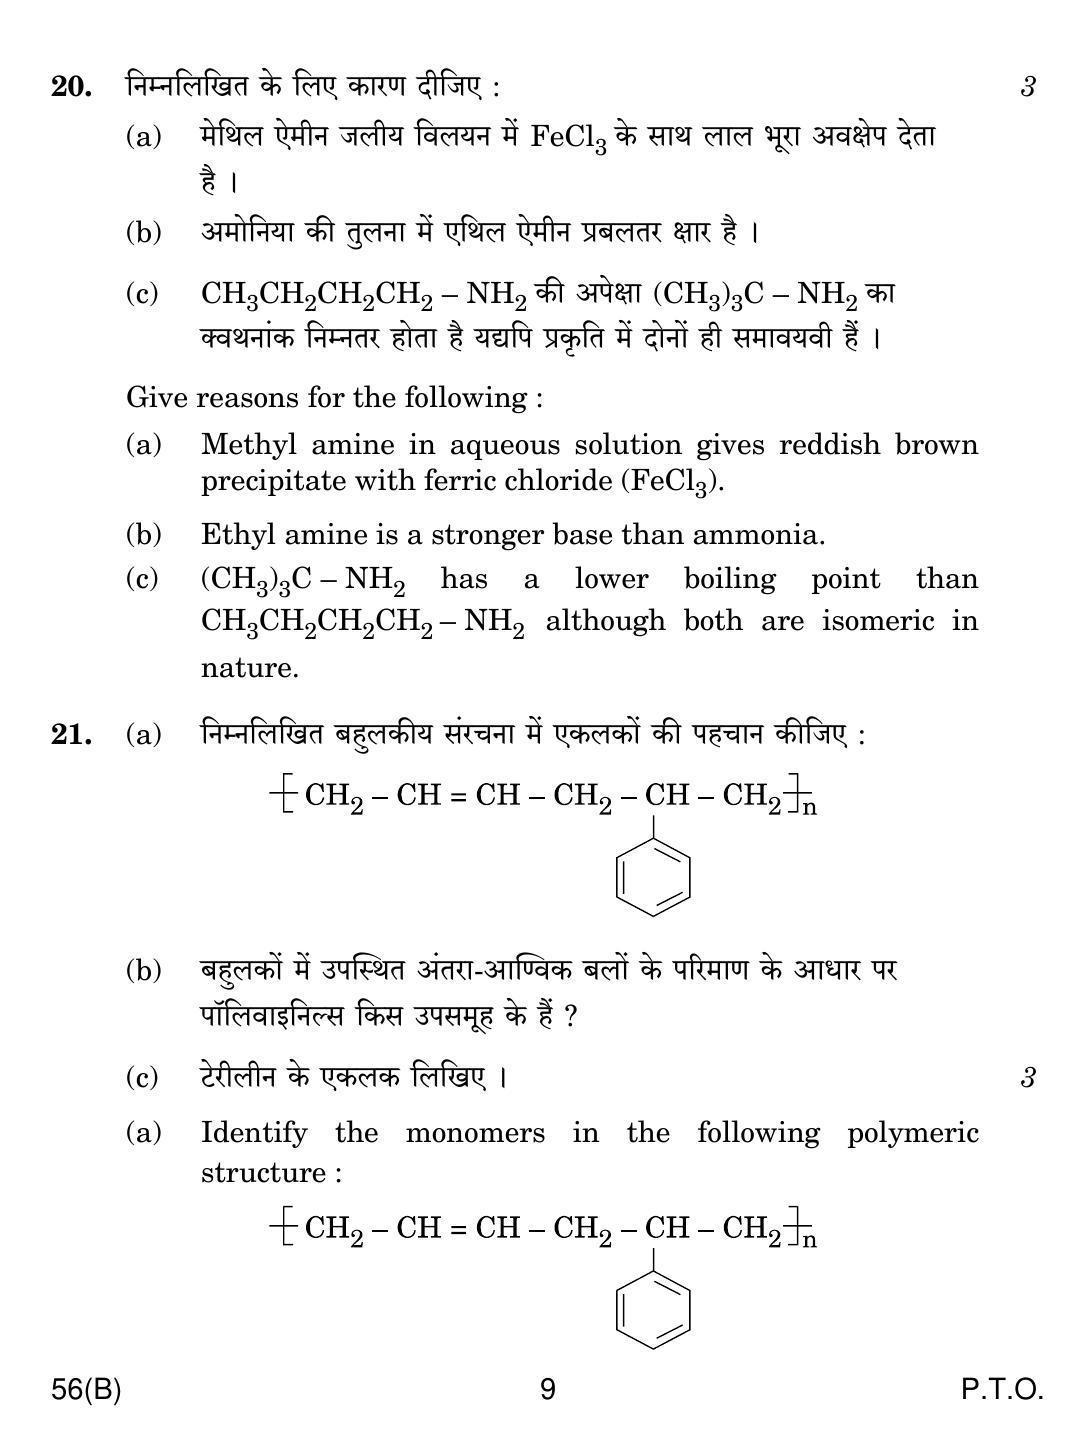 CBSE Class 12 56(B) CHEMISTRY FOR BLIND CANDIDATES 2018 Question Paper - Page 9